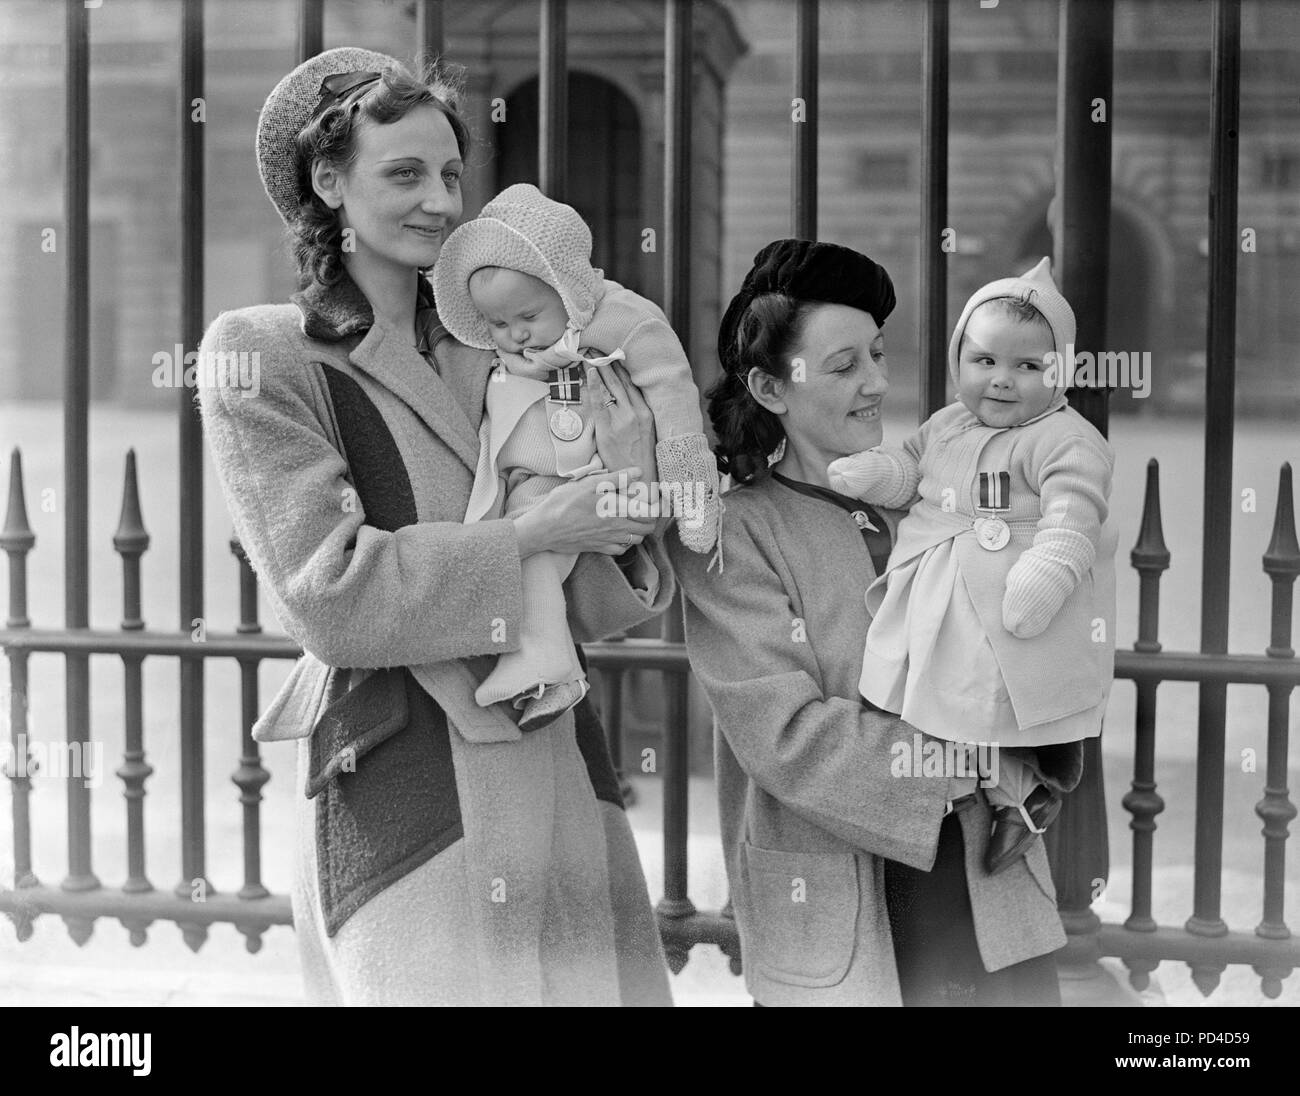 26th March, 1945. London, England. Posthumous Investiture at The palace. Mrs. May Kelly (left), of Kensington, London, whose husband won a second Bar to his D.S.M. lets her sleeping baby Mavis what the decoration. Also, Mrs. Margaret Barton, (right), of Liverpool, with her 8 month old daughter Brenda wearing her father's D.S.M. The awards were presented to the widows at an investiture at Buckingham Palace, when the King decorated next-of-kin of Empire heroes fallen in battle. Stock Photo